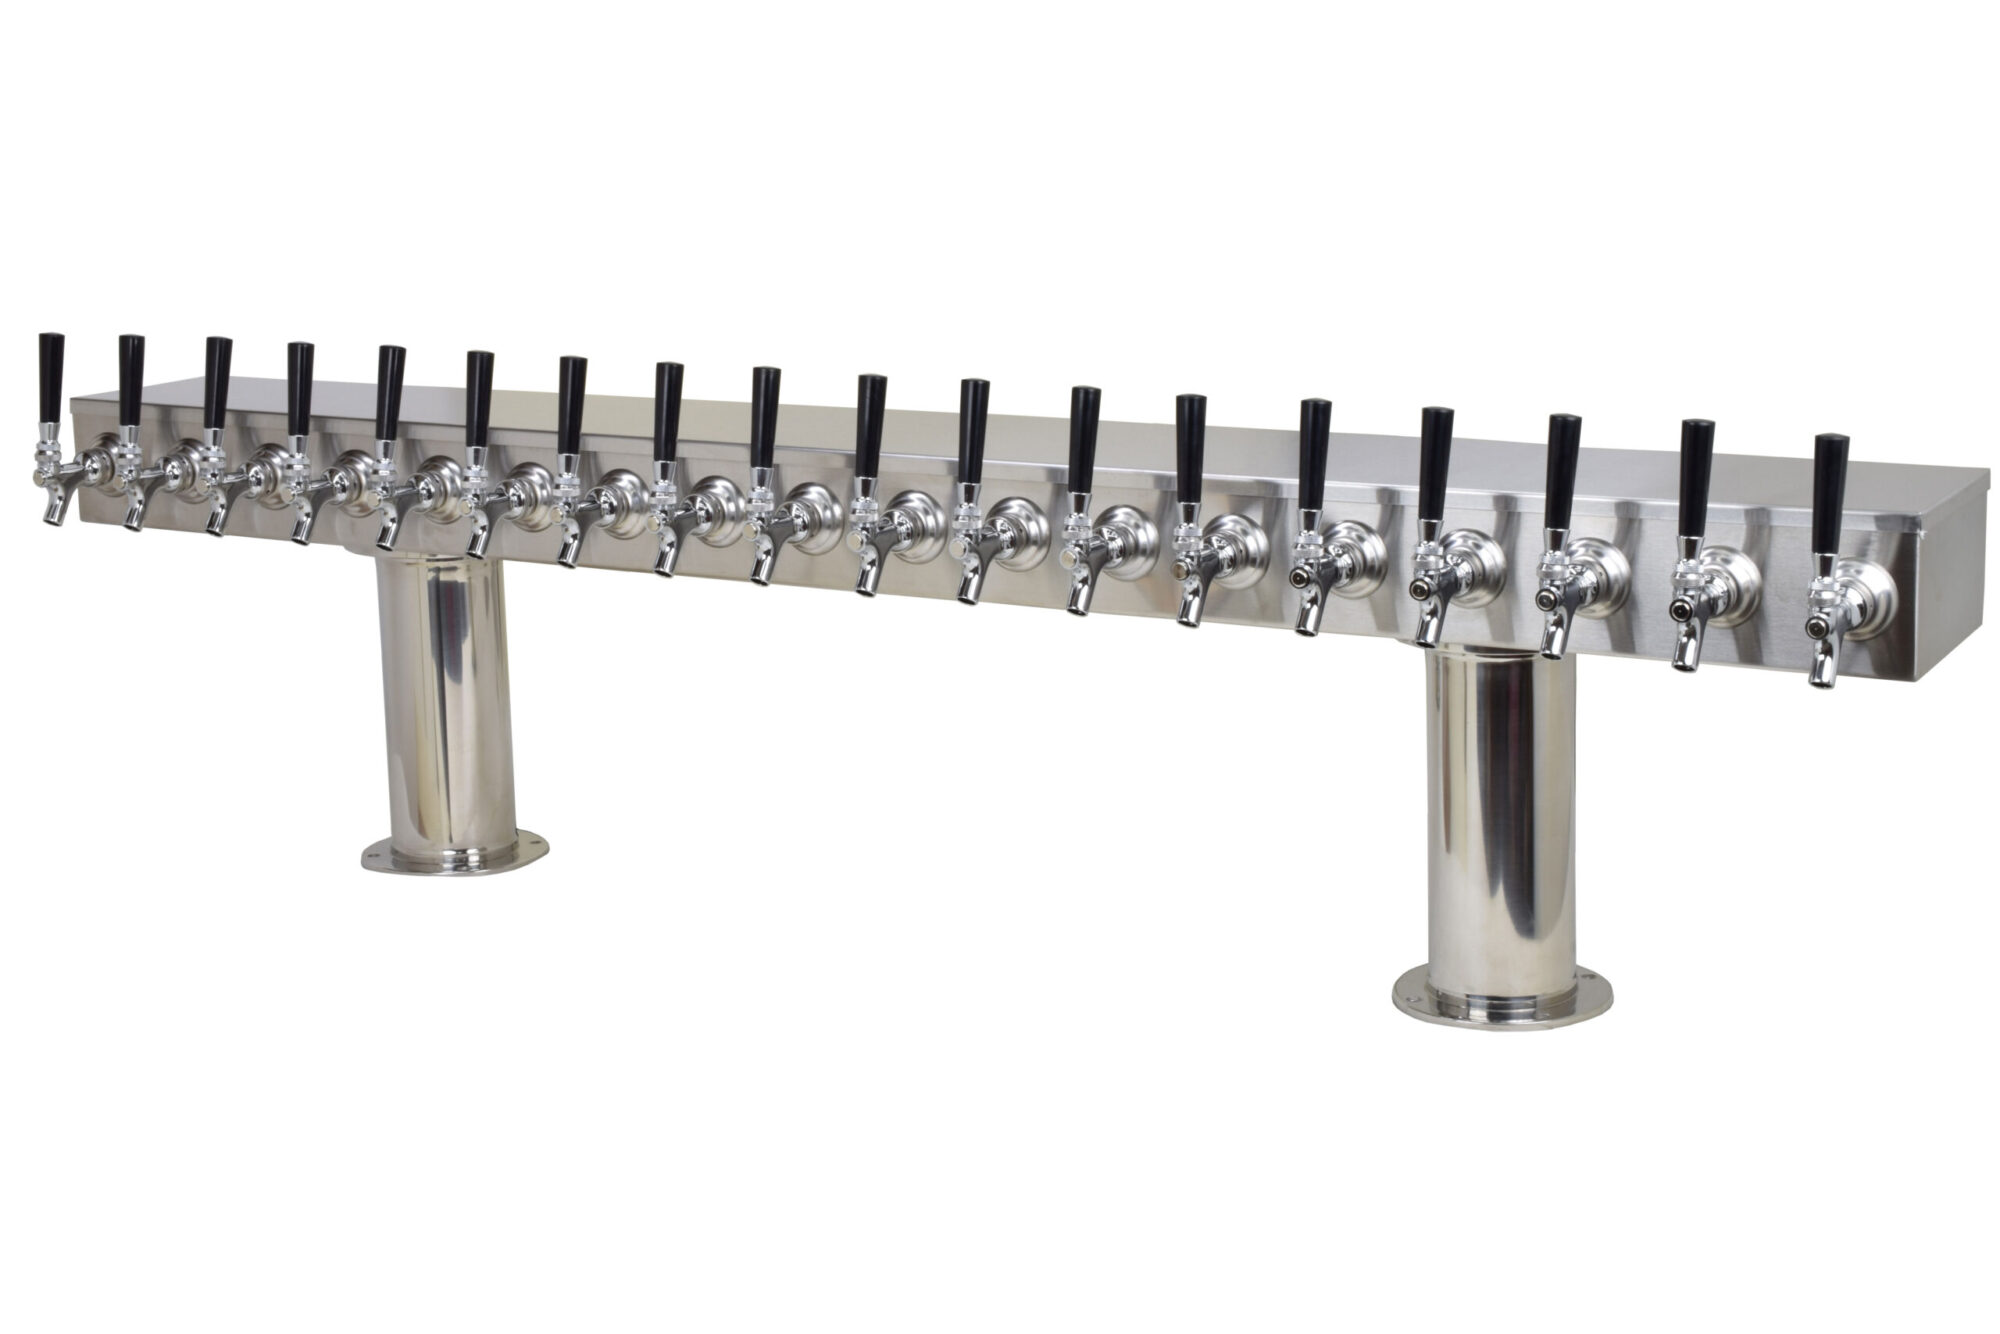 759RG-18-4SS Eighteen Faucet Pass Through Tower with 4" Bases - All S/S Faucets and Shanks - Glycol Ready